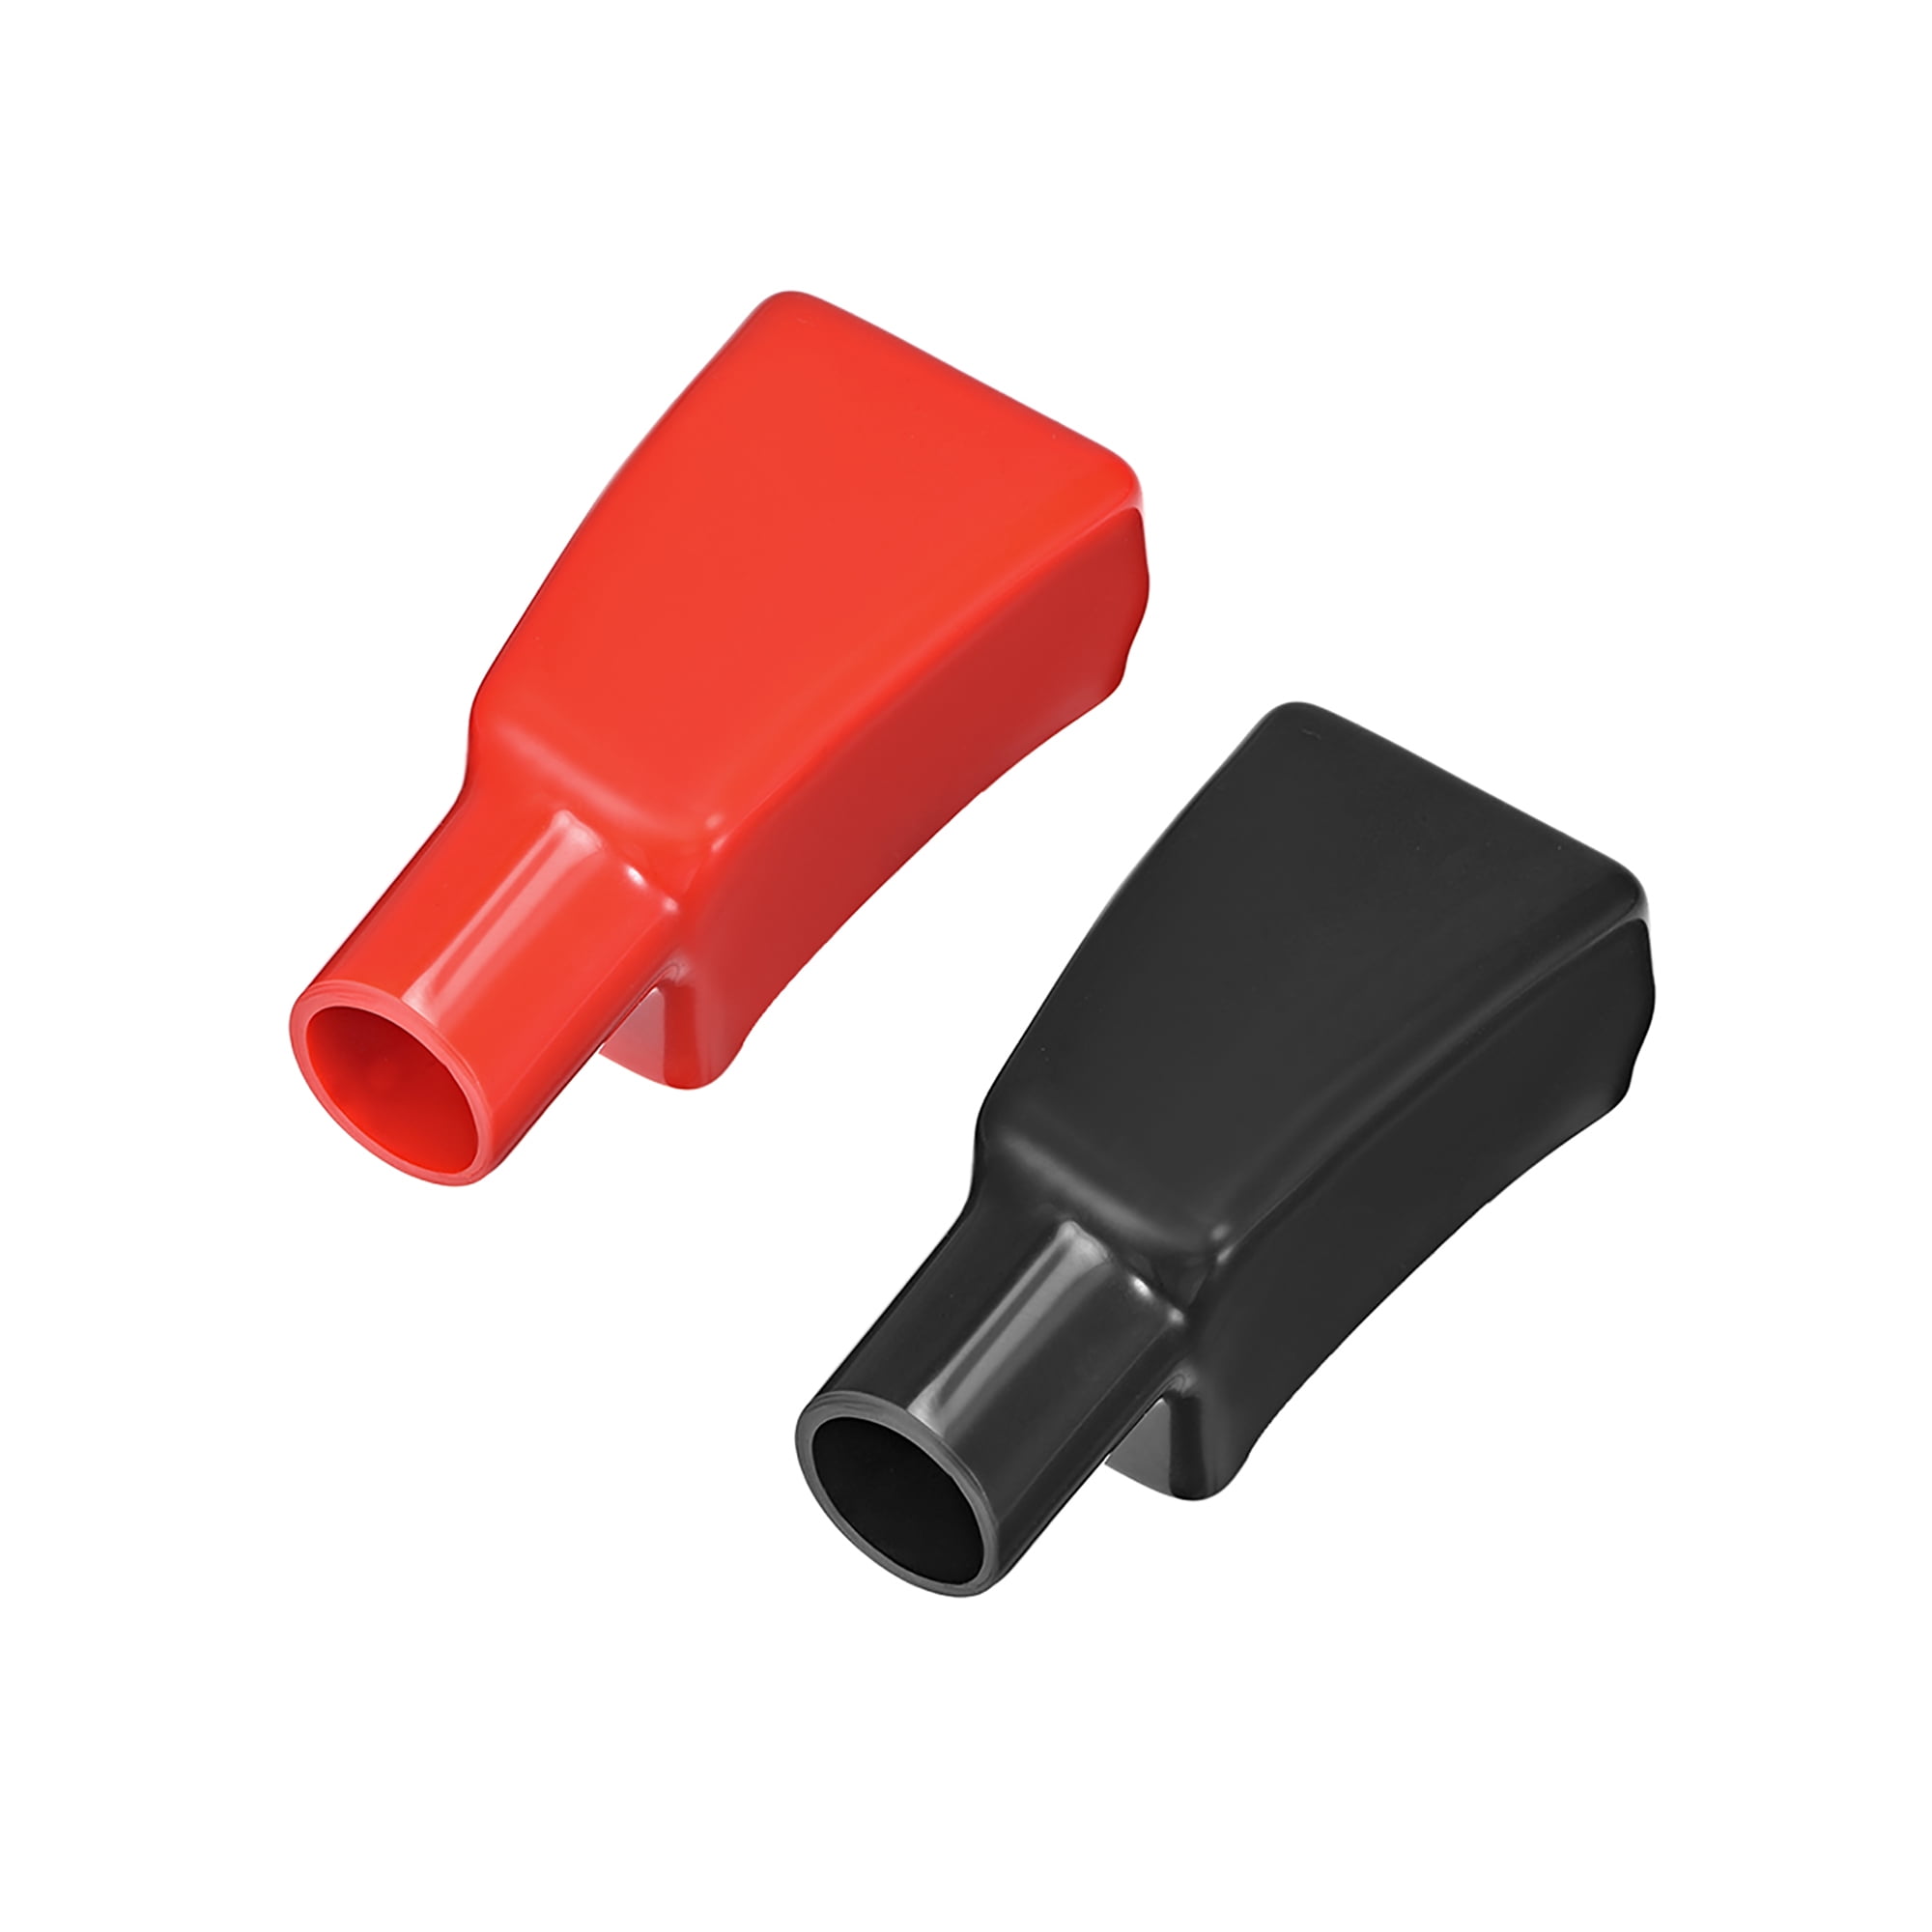 Details about   Flexible Battery Terminal Insulating Rubber Protector Cover 14mm Cable 2 Pair 